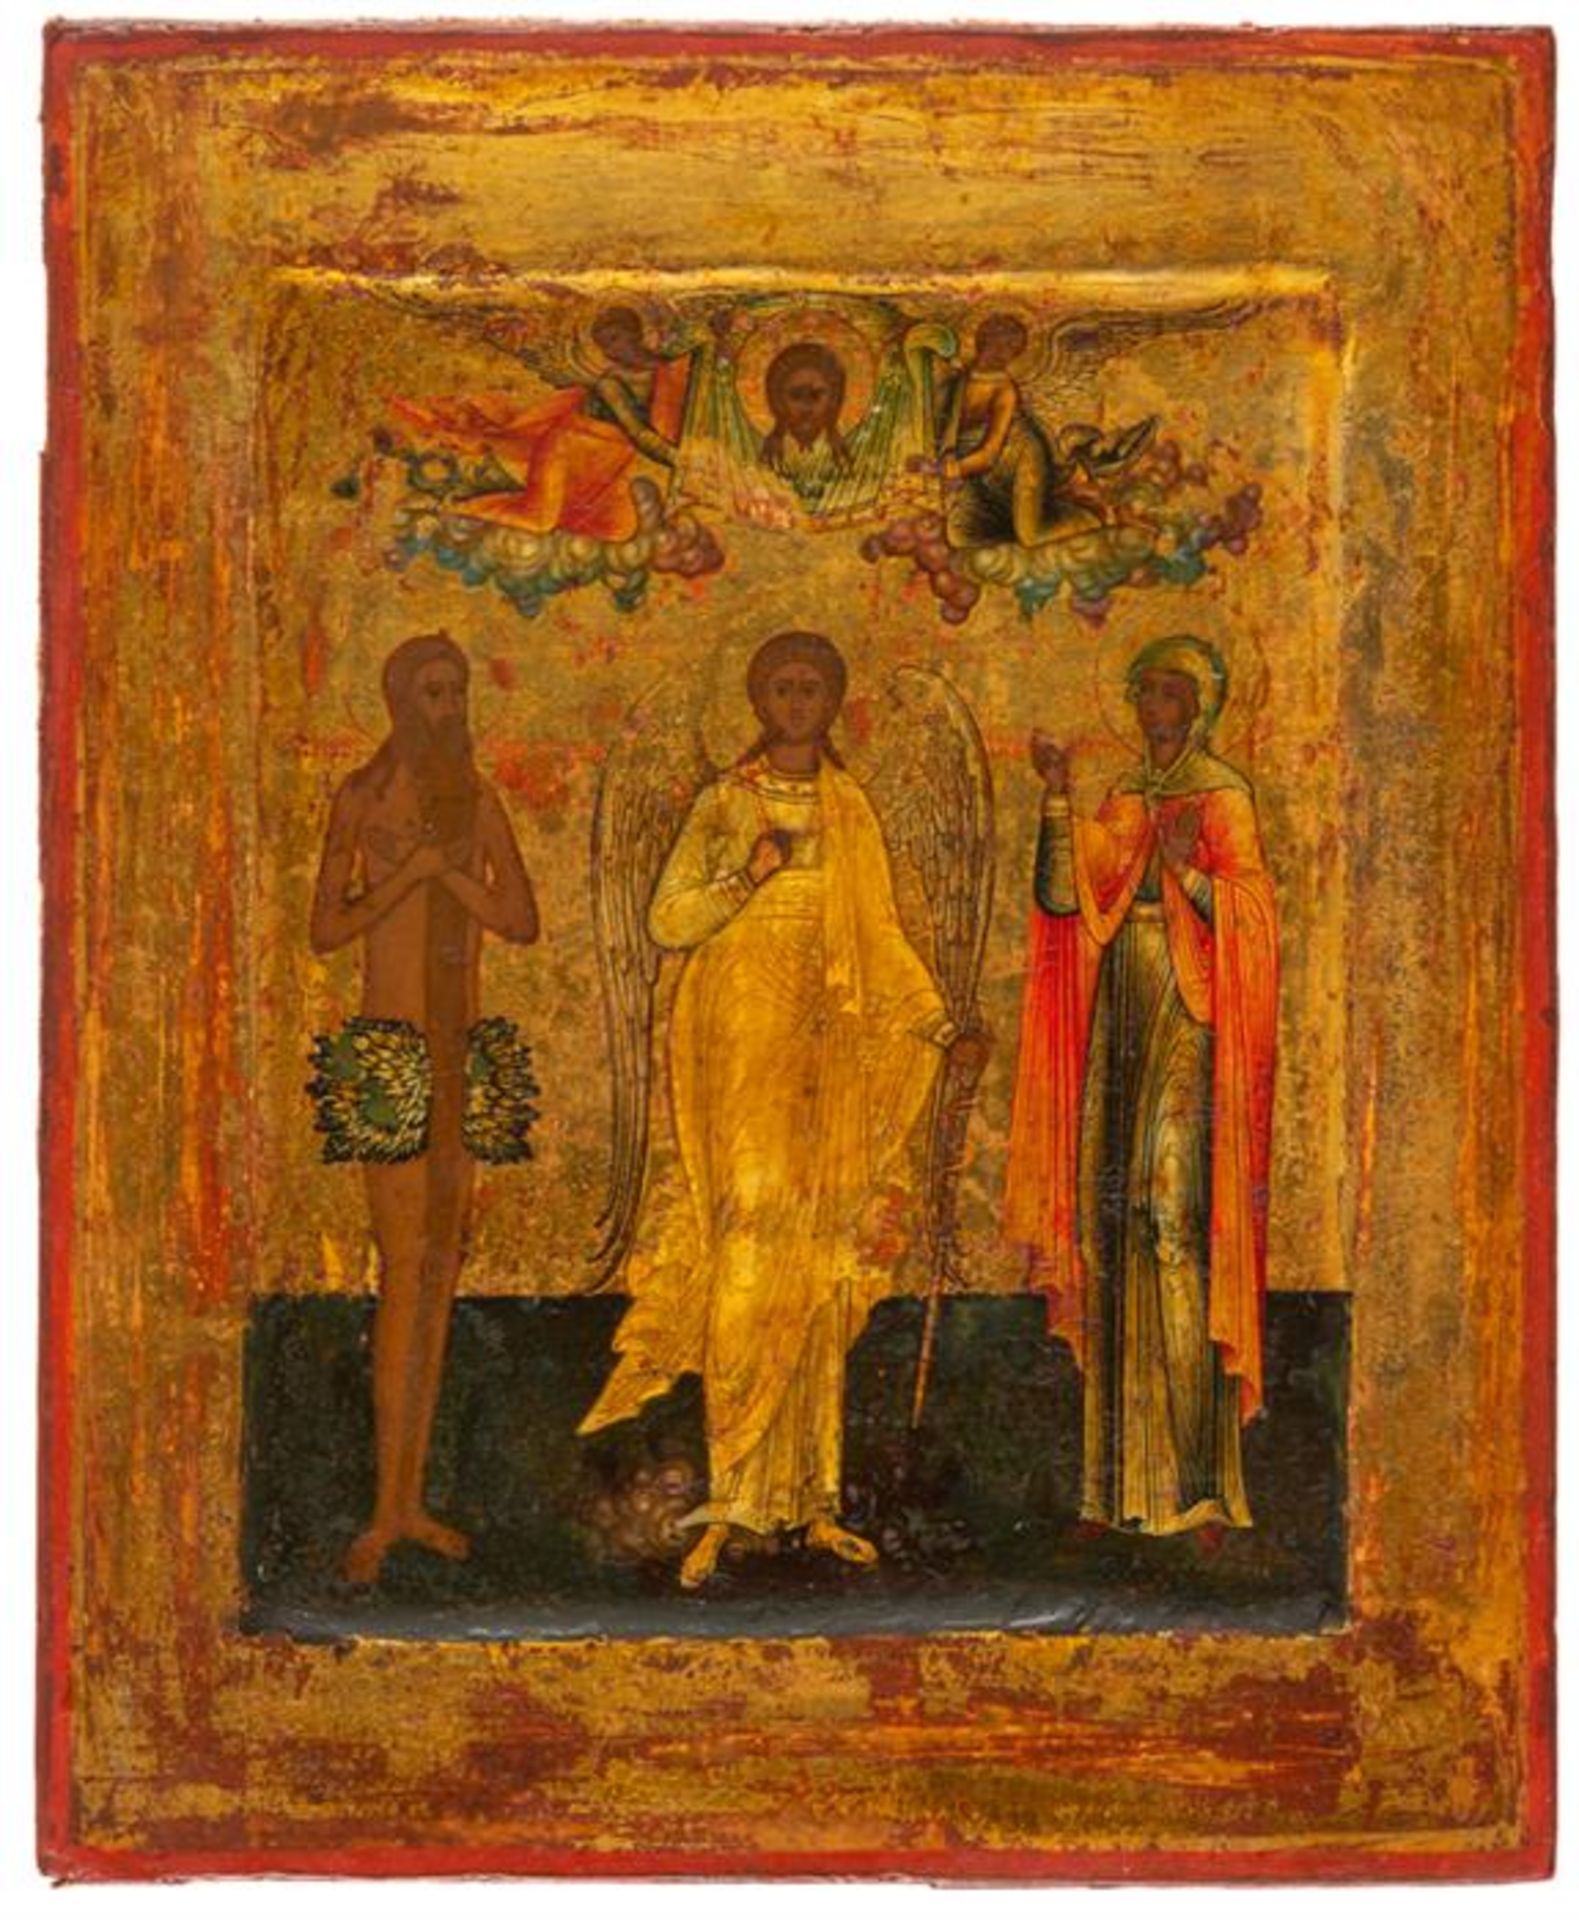 RUSSIAN MINIATURE ICON SHOWING ST. PETE THE ATHONITE, ST. GUARDIAN ANGEL AND ST. TATIANA